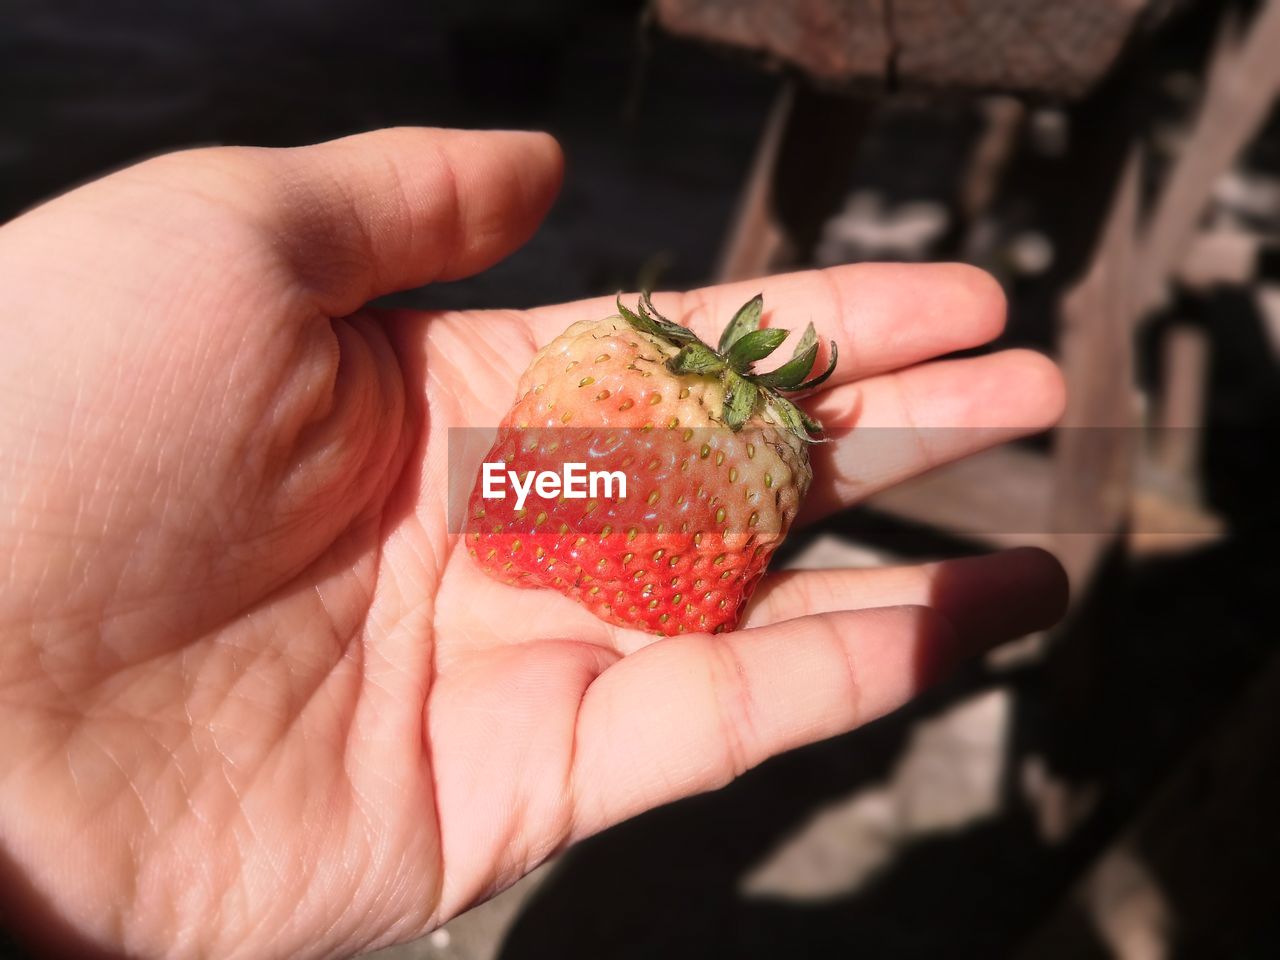 CROPPED IMAGE OF HAND HOLDING STRAWBERRY